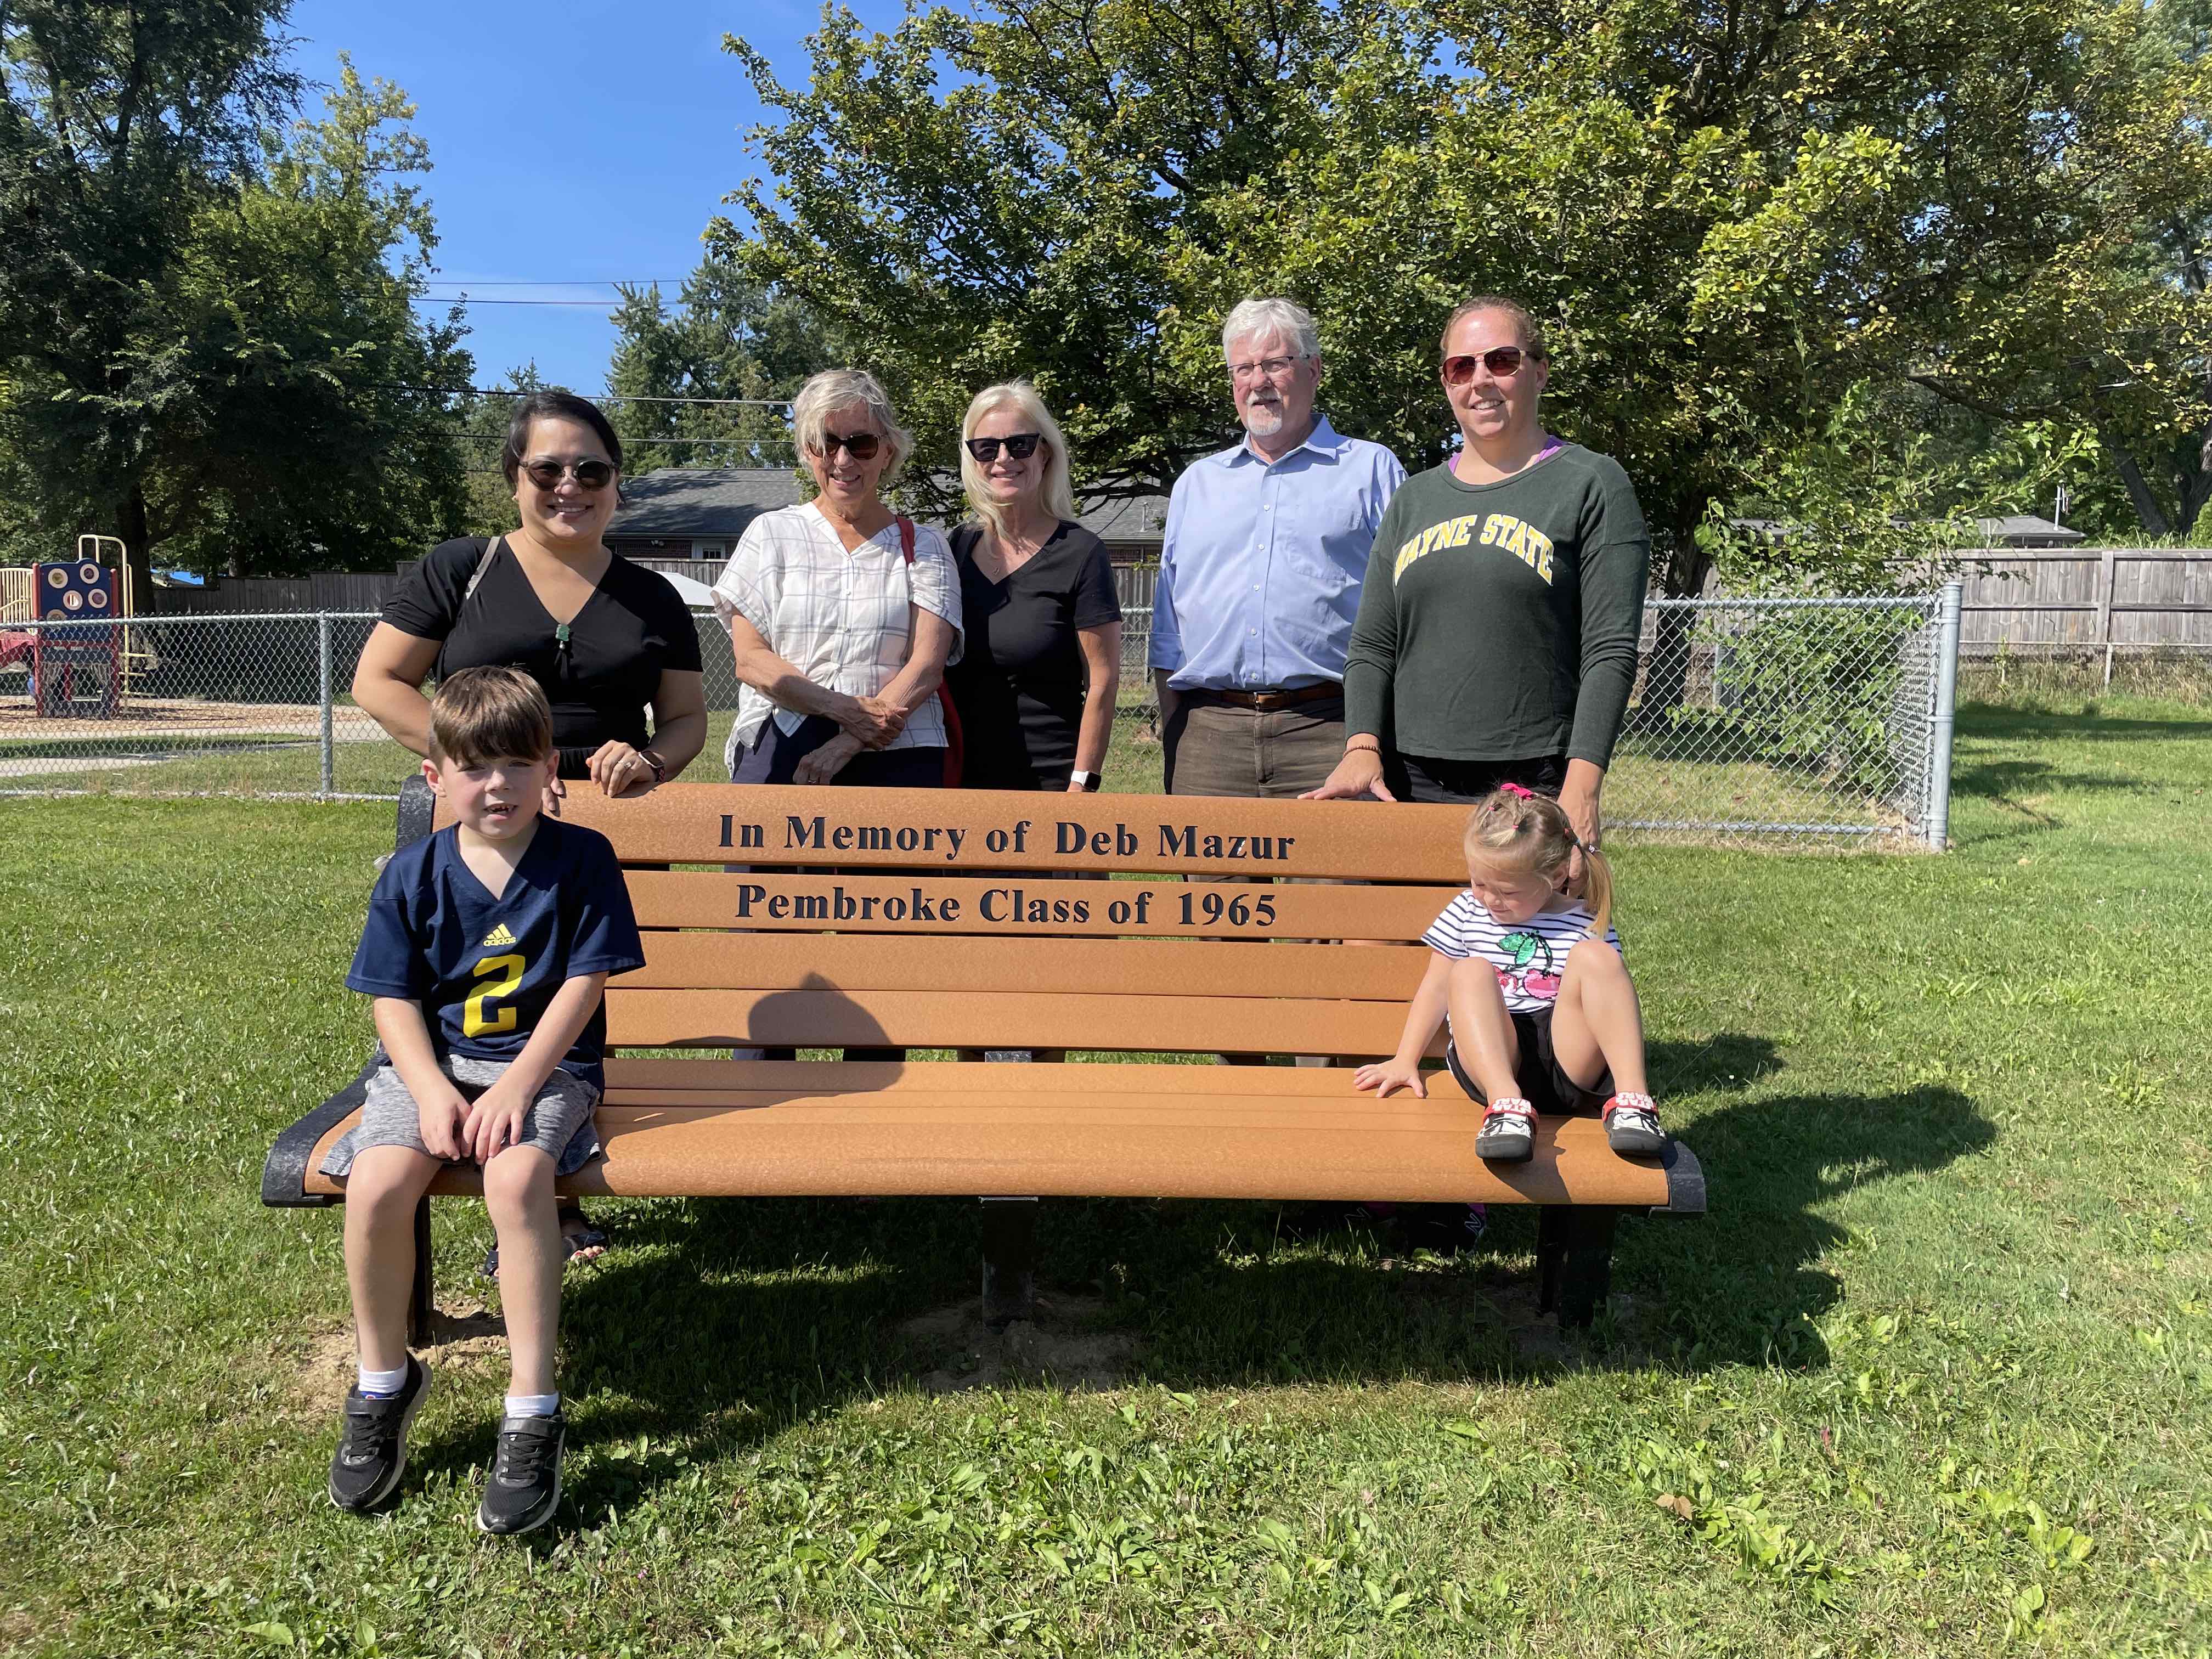 Faculty and staff gather around bench dedicated to the memory of Deb Mazur